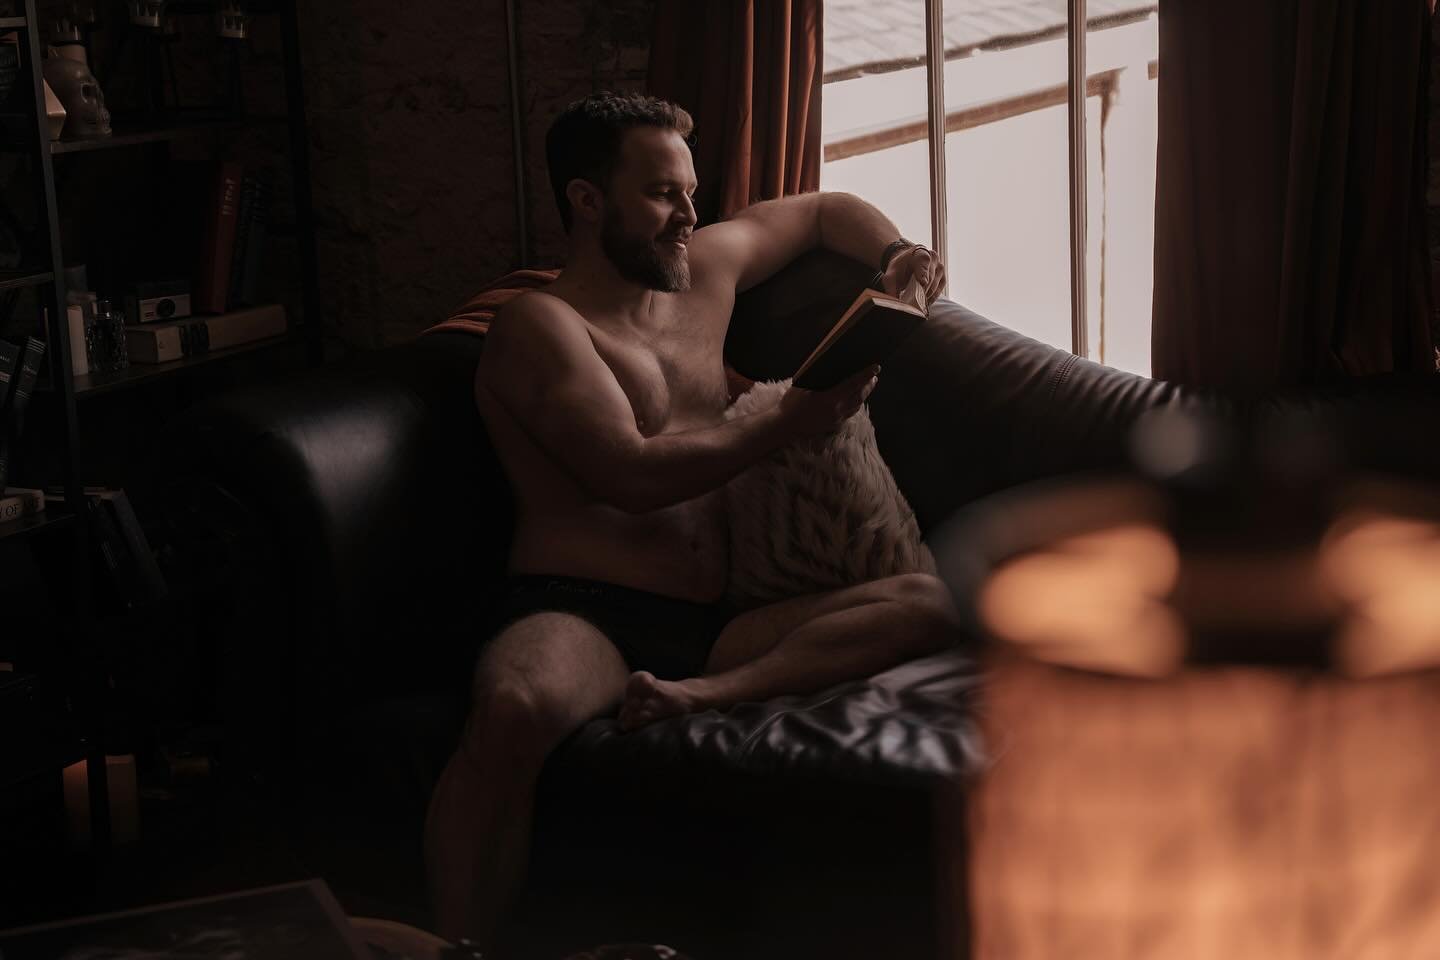 Men deserve to feel seen, celebrated, and confident too. Boudoir is about embracing who you are, breaking through body image barriers, and discovering the power within. Your journey matters just as much. 
.
.
.
#maleboudoir #boudoirformen #nashvillep